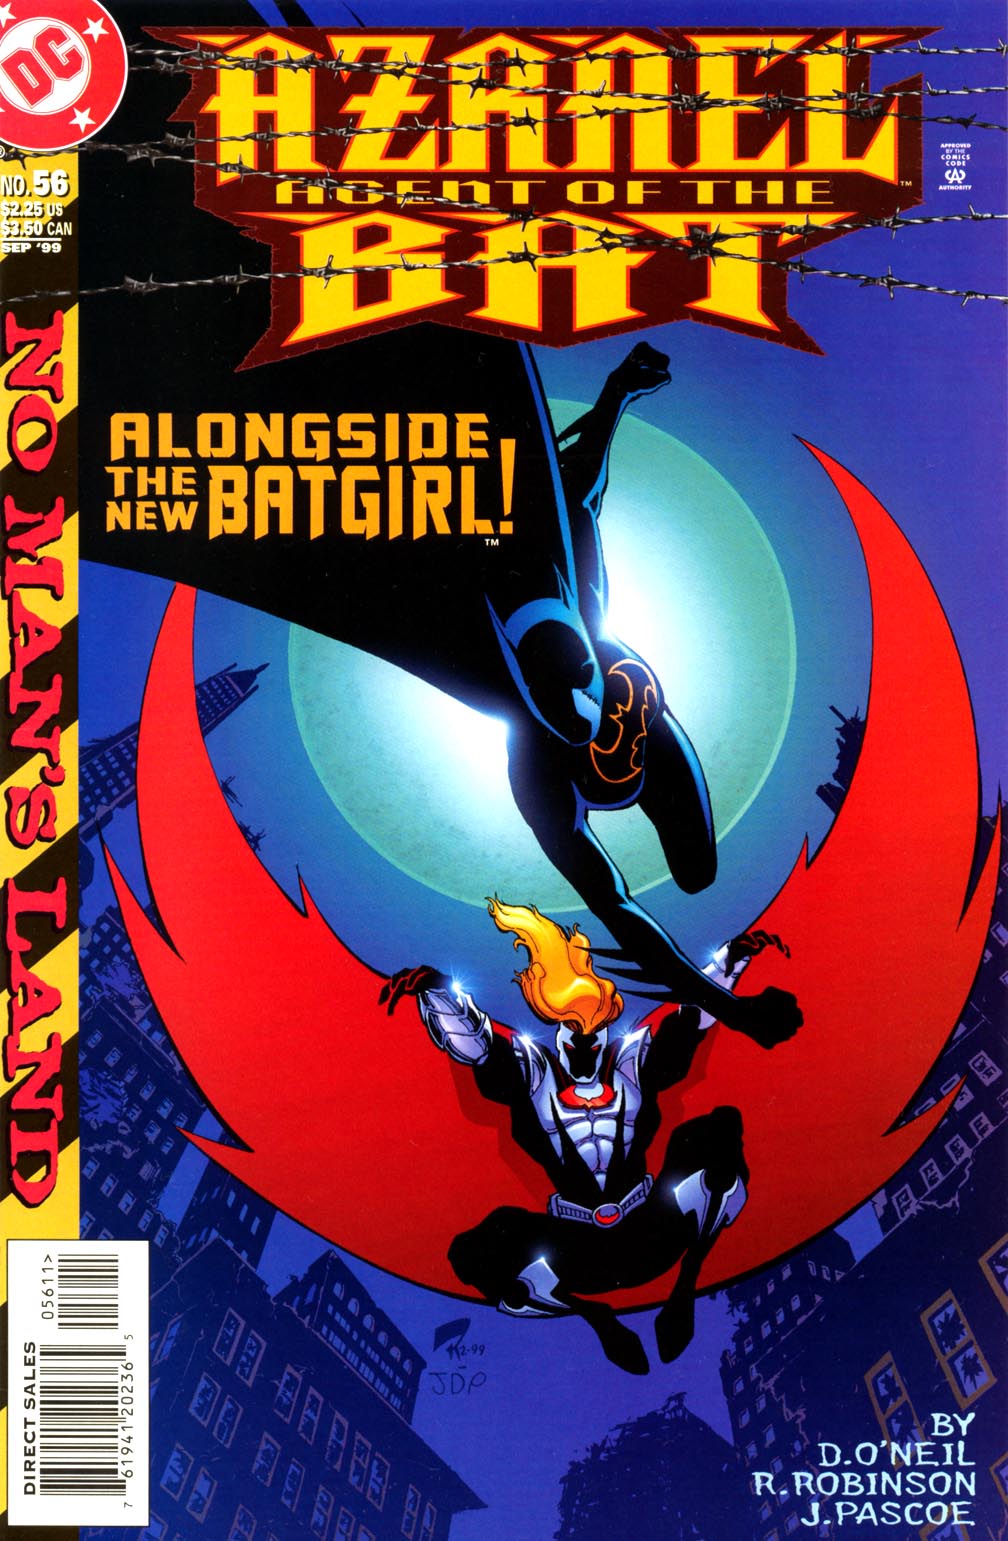 Read online Azrael: Agent of the Bat comic -  Issue #56 - 1